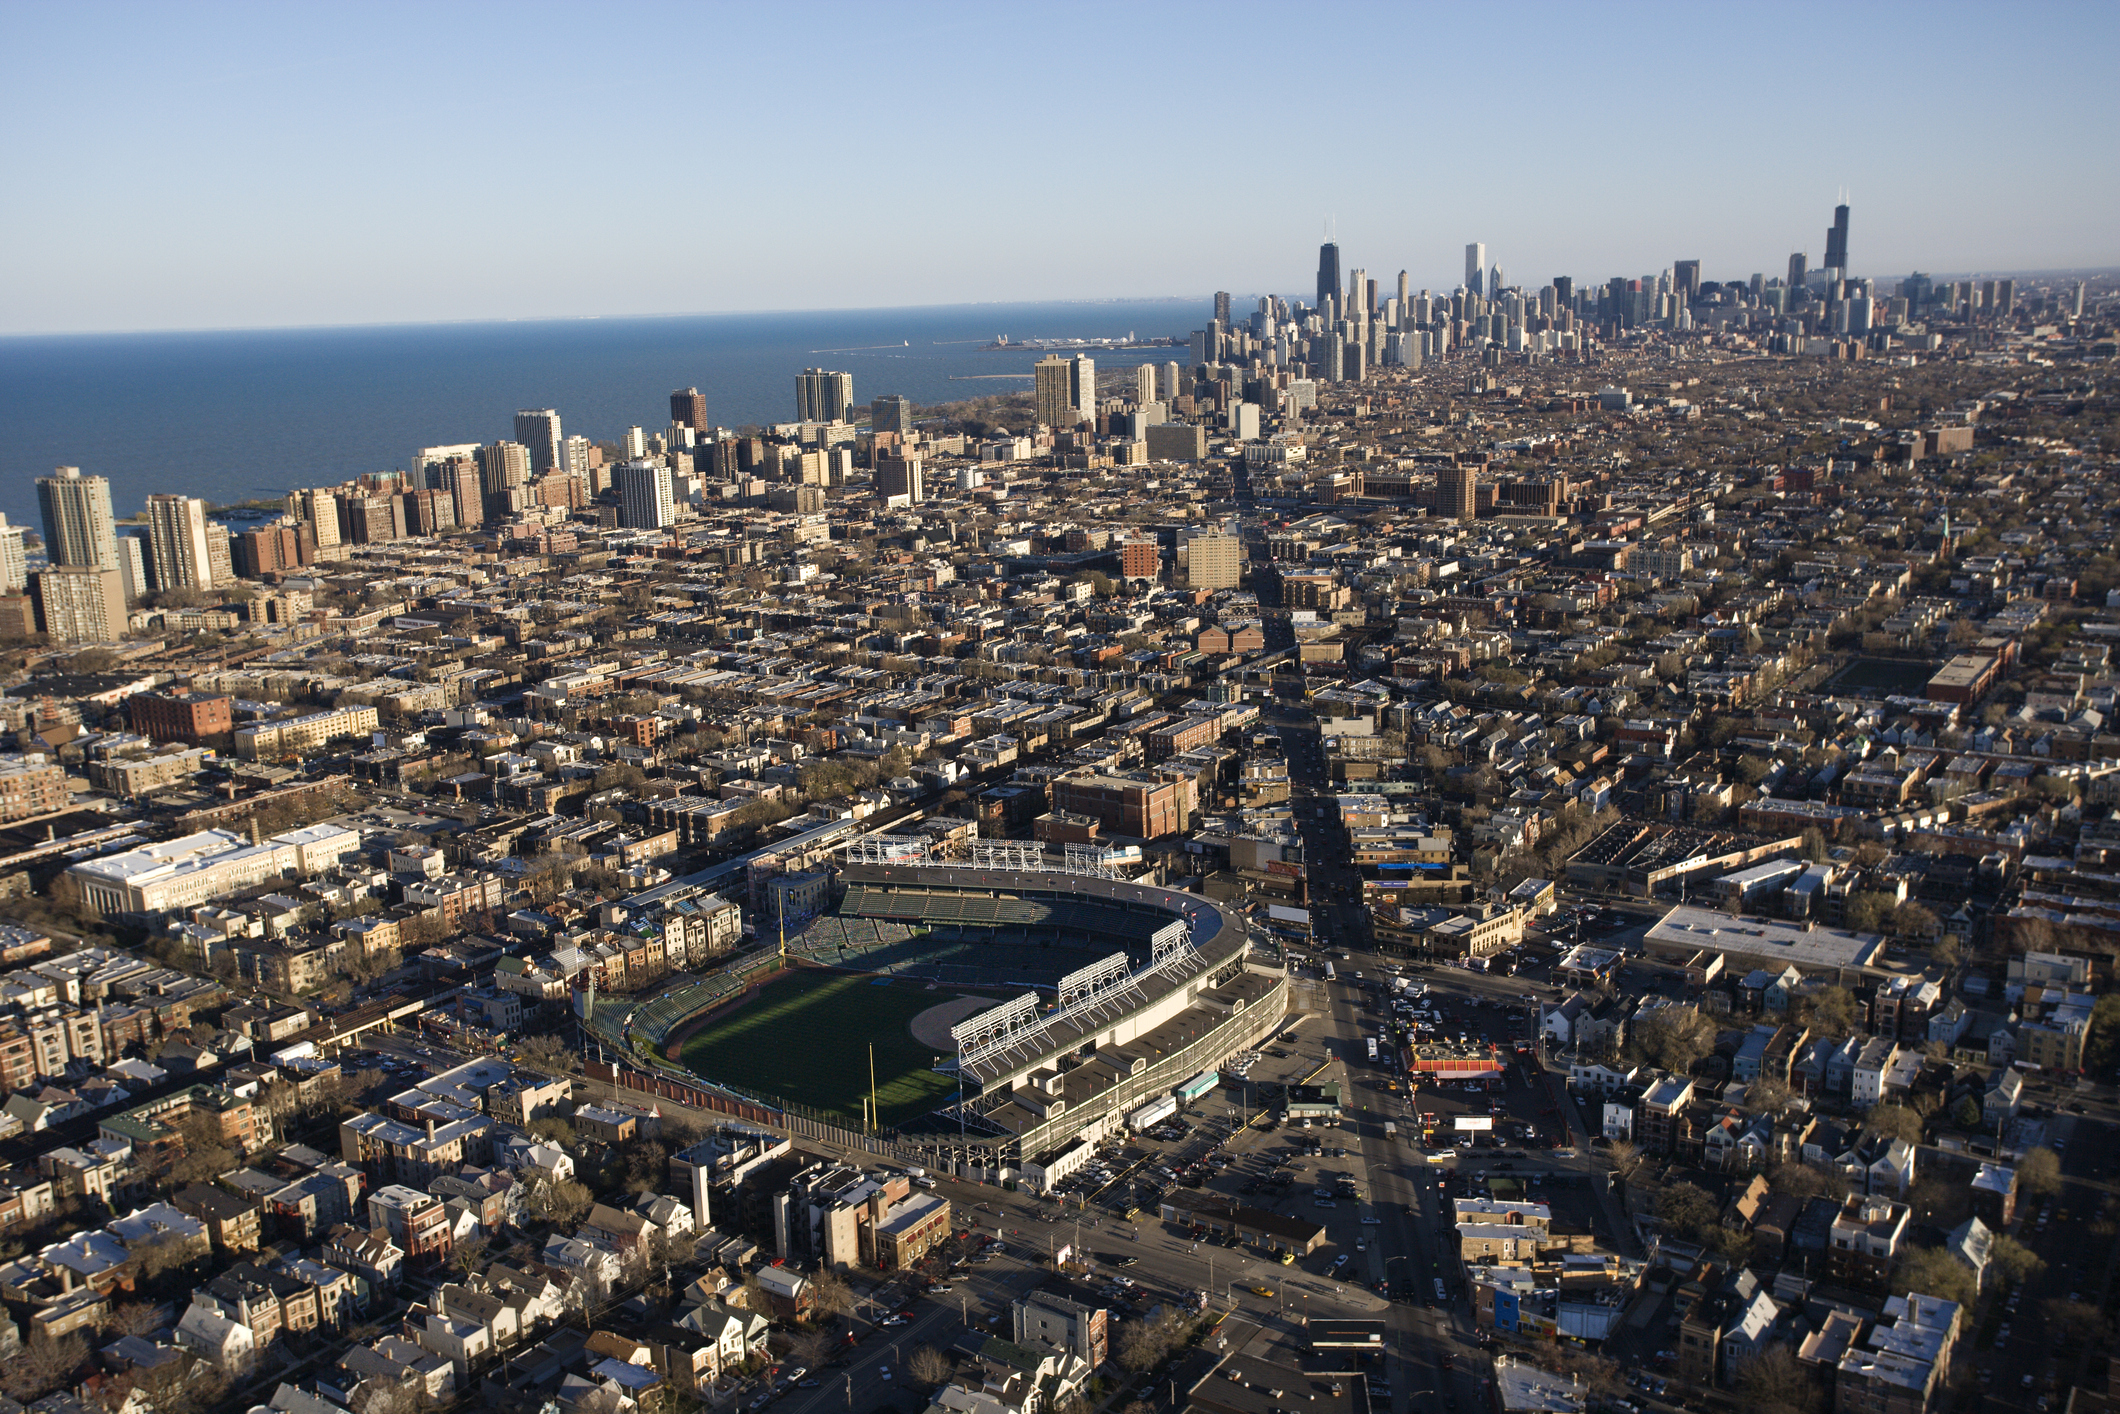 Wrigley Field Renovations Are Nothing Short Of Spectacular